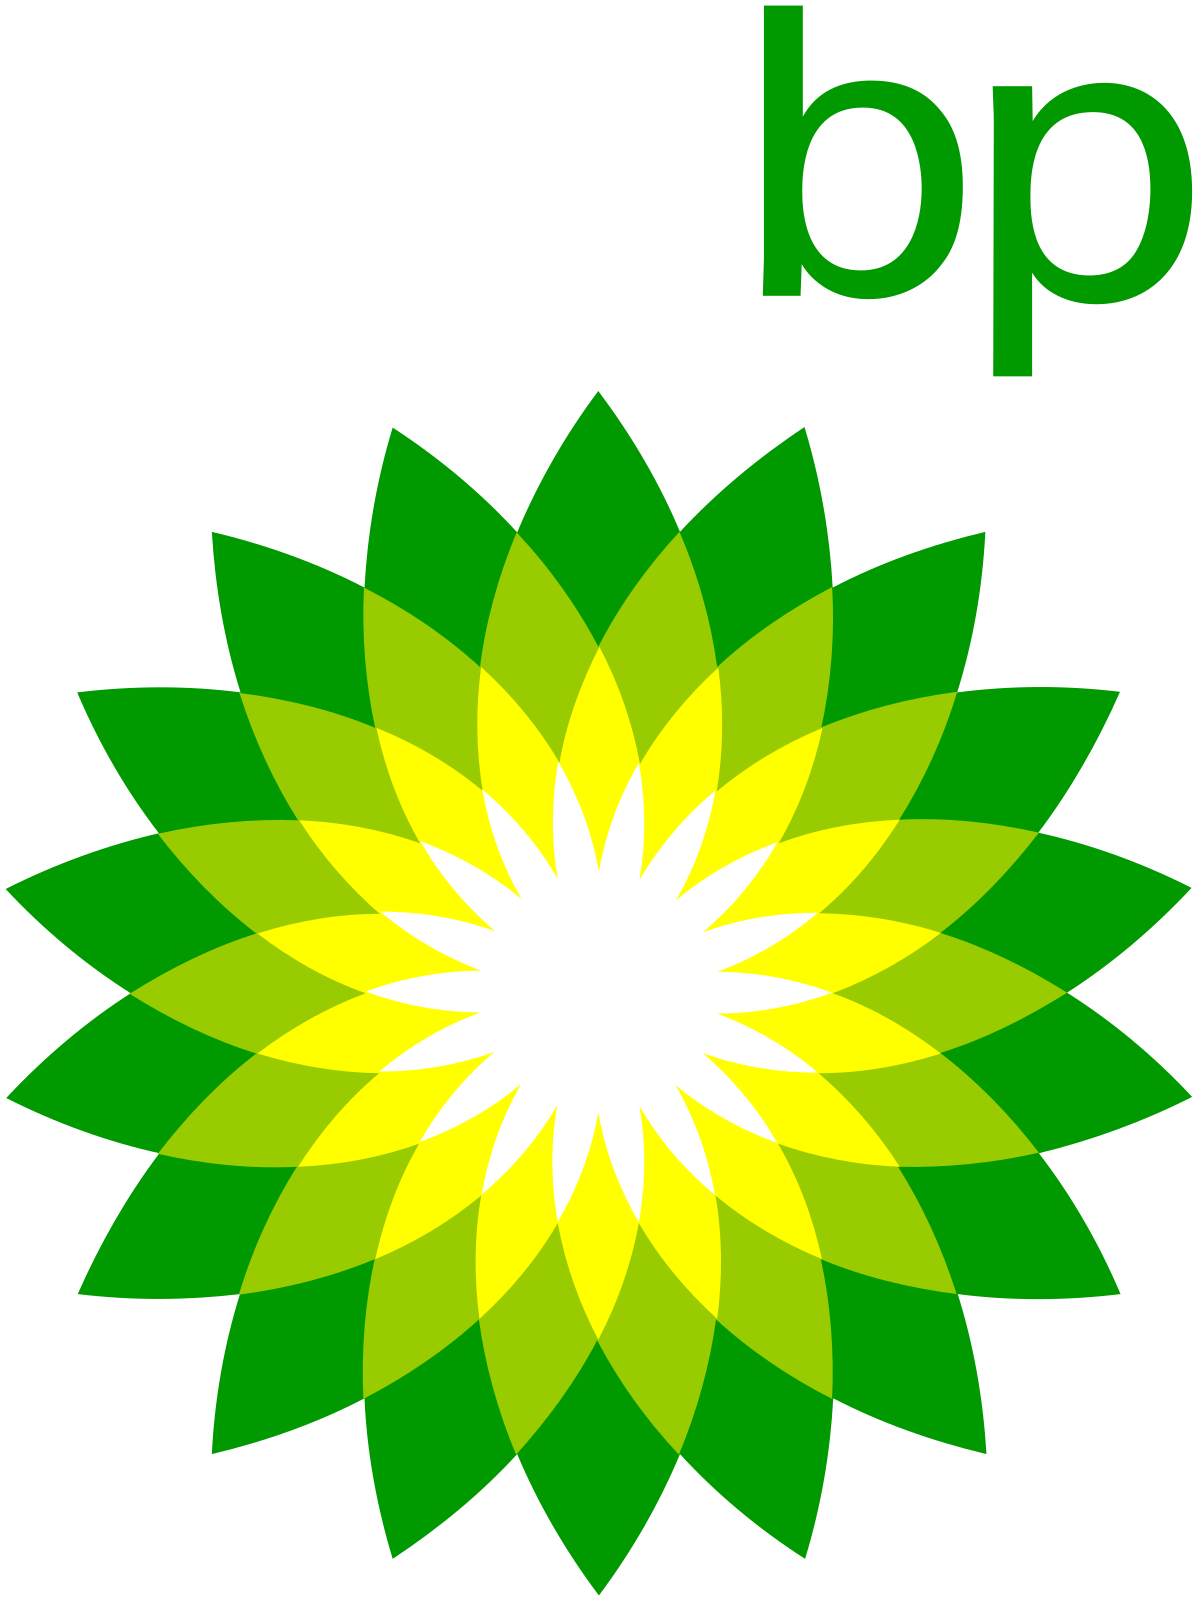 Companies with a Bomb Logo - BP